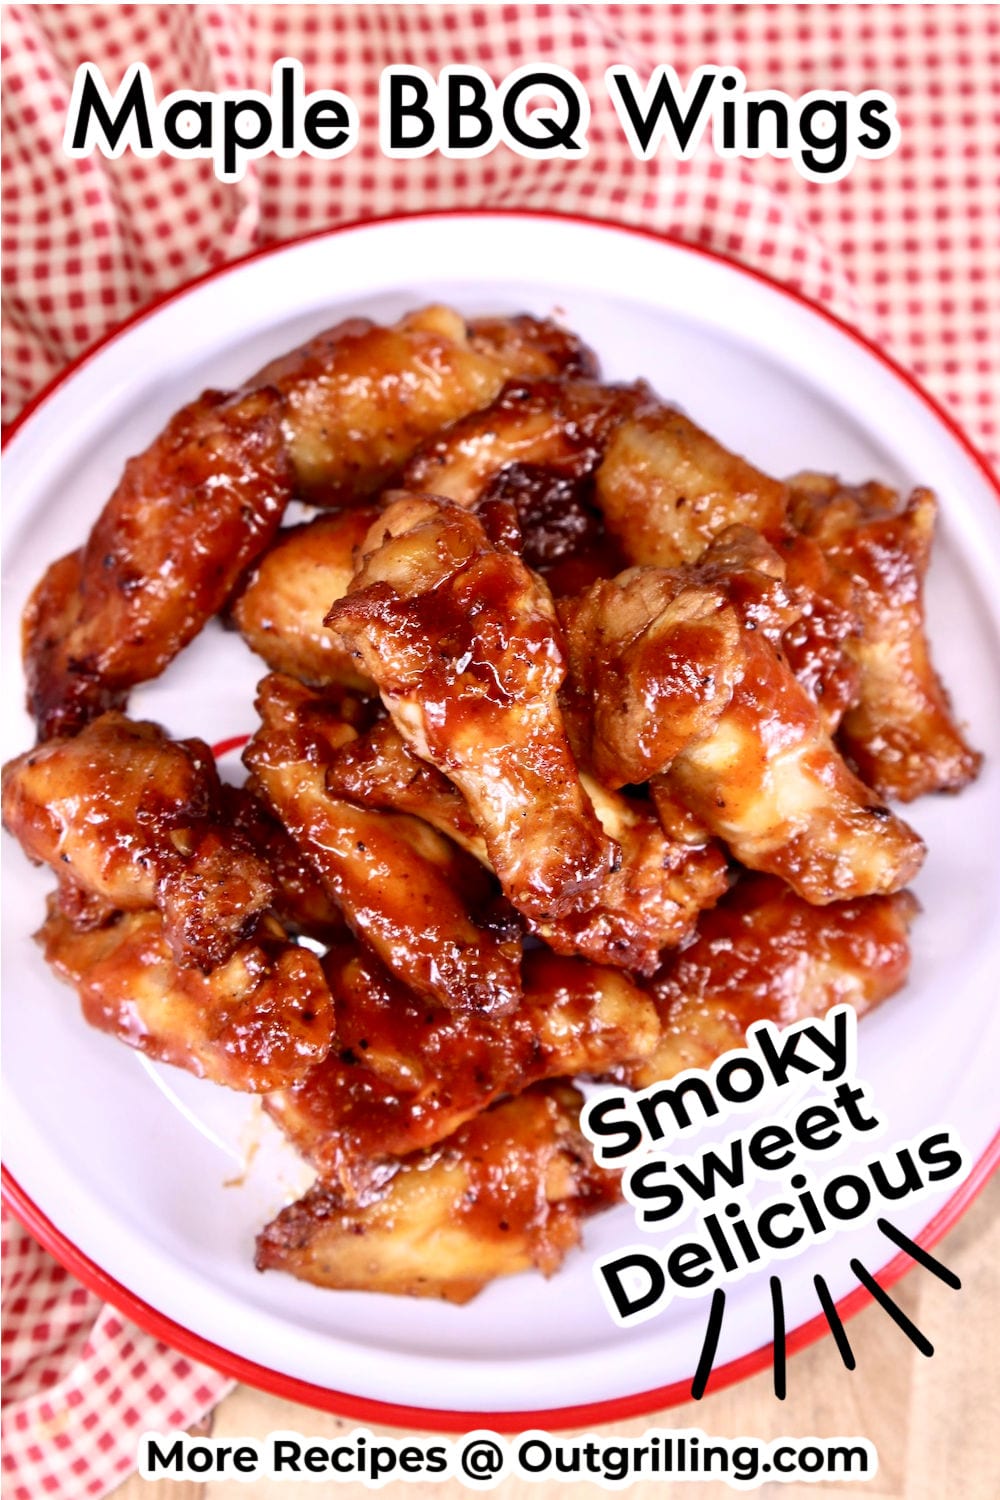 Maple BBQ Chicken Wings on a plate, red check napkin, text overlay